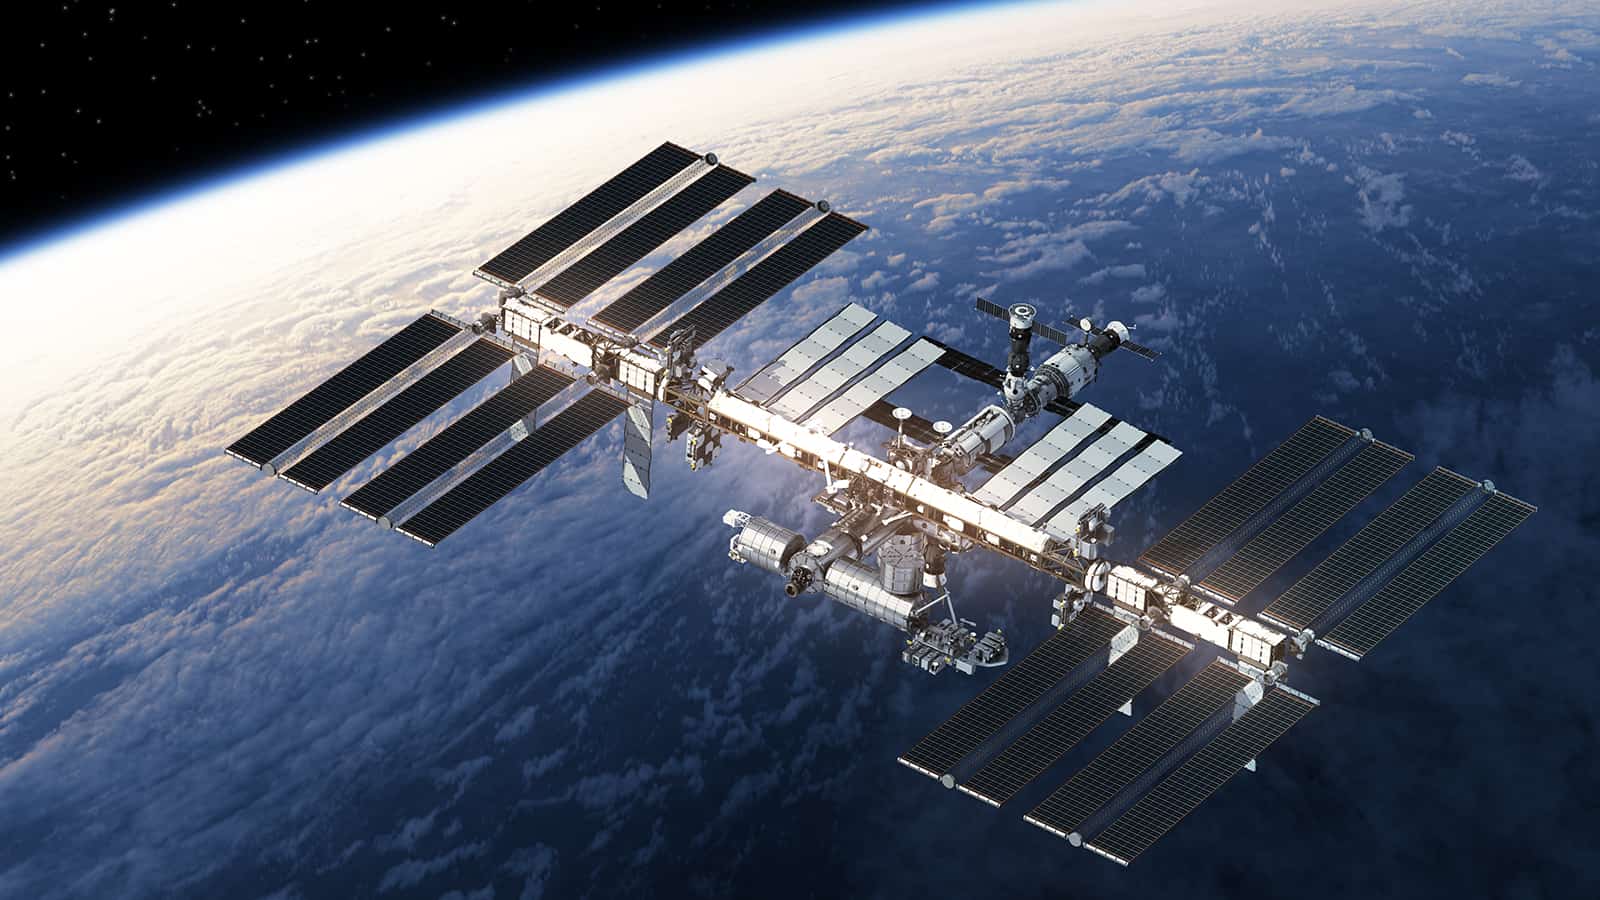 NASA to Retire the International Space Station by 2030, Replacing It With a Private Sector Solution